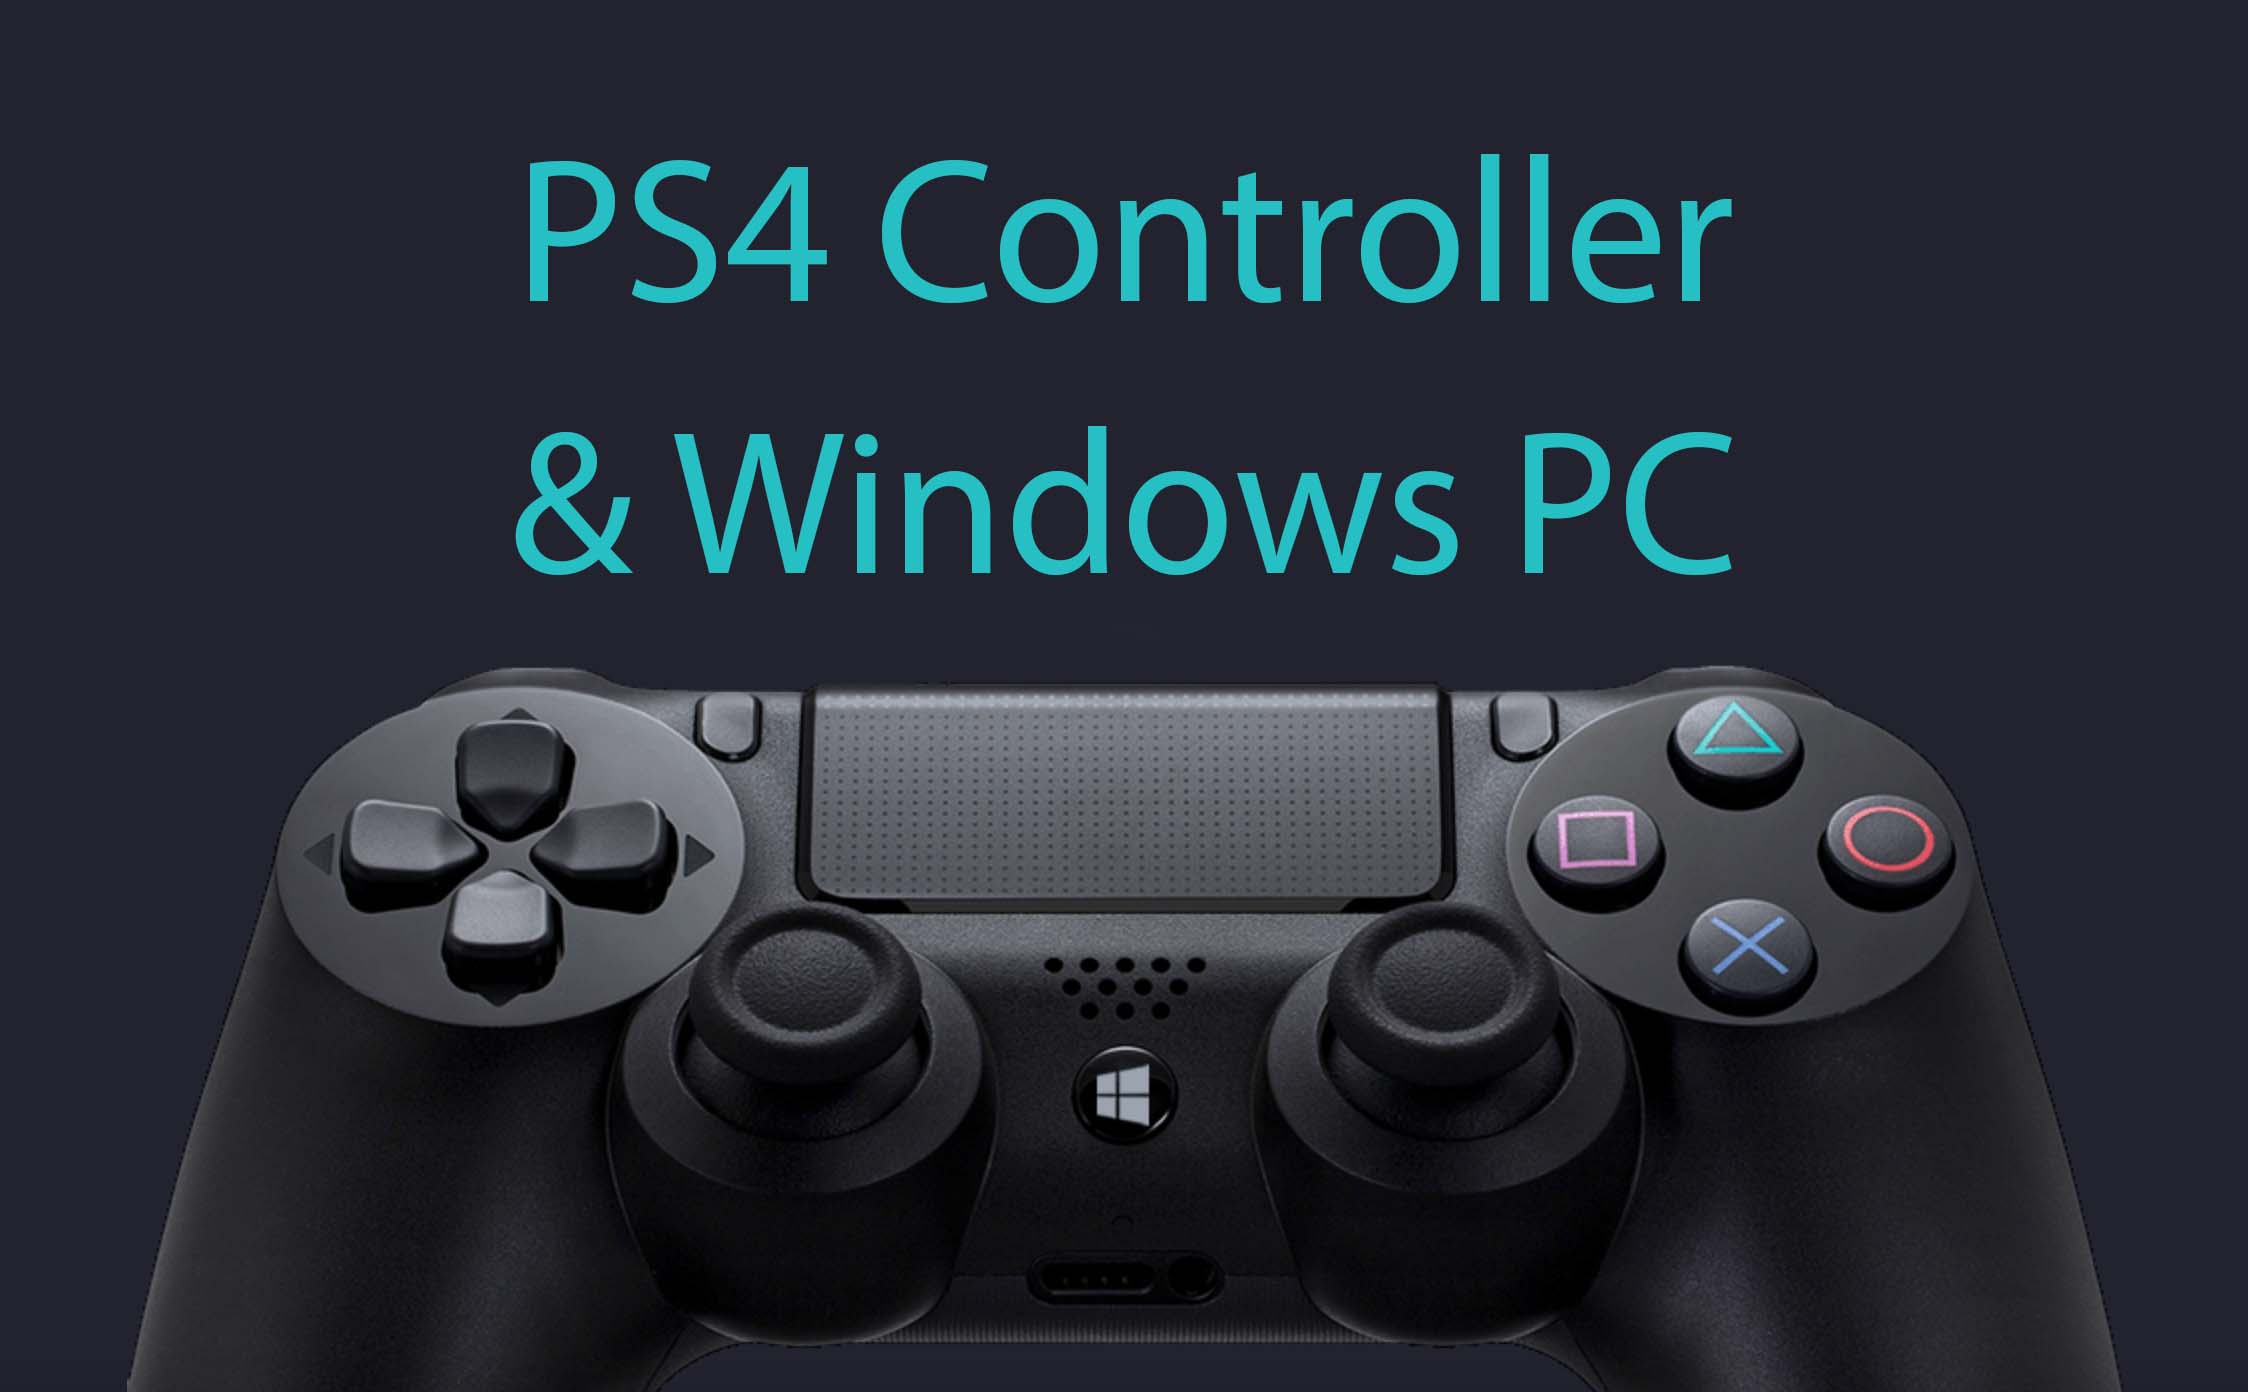 Ensure your PS4 controller is fully charged before connecting it to your PC.
Update your Windows operating system to the latest version to ensure compatibility with the PS4 controller.